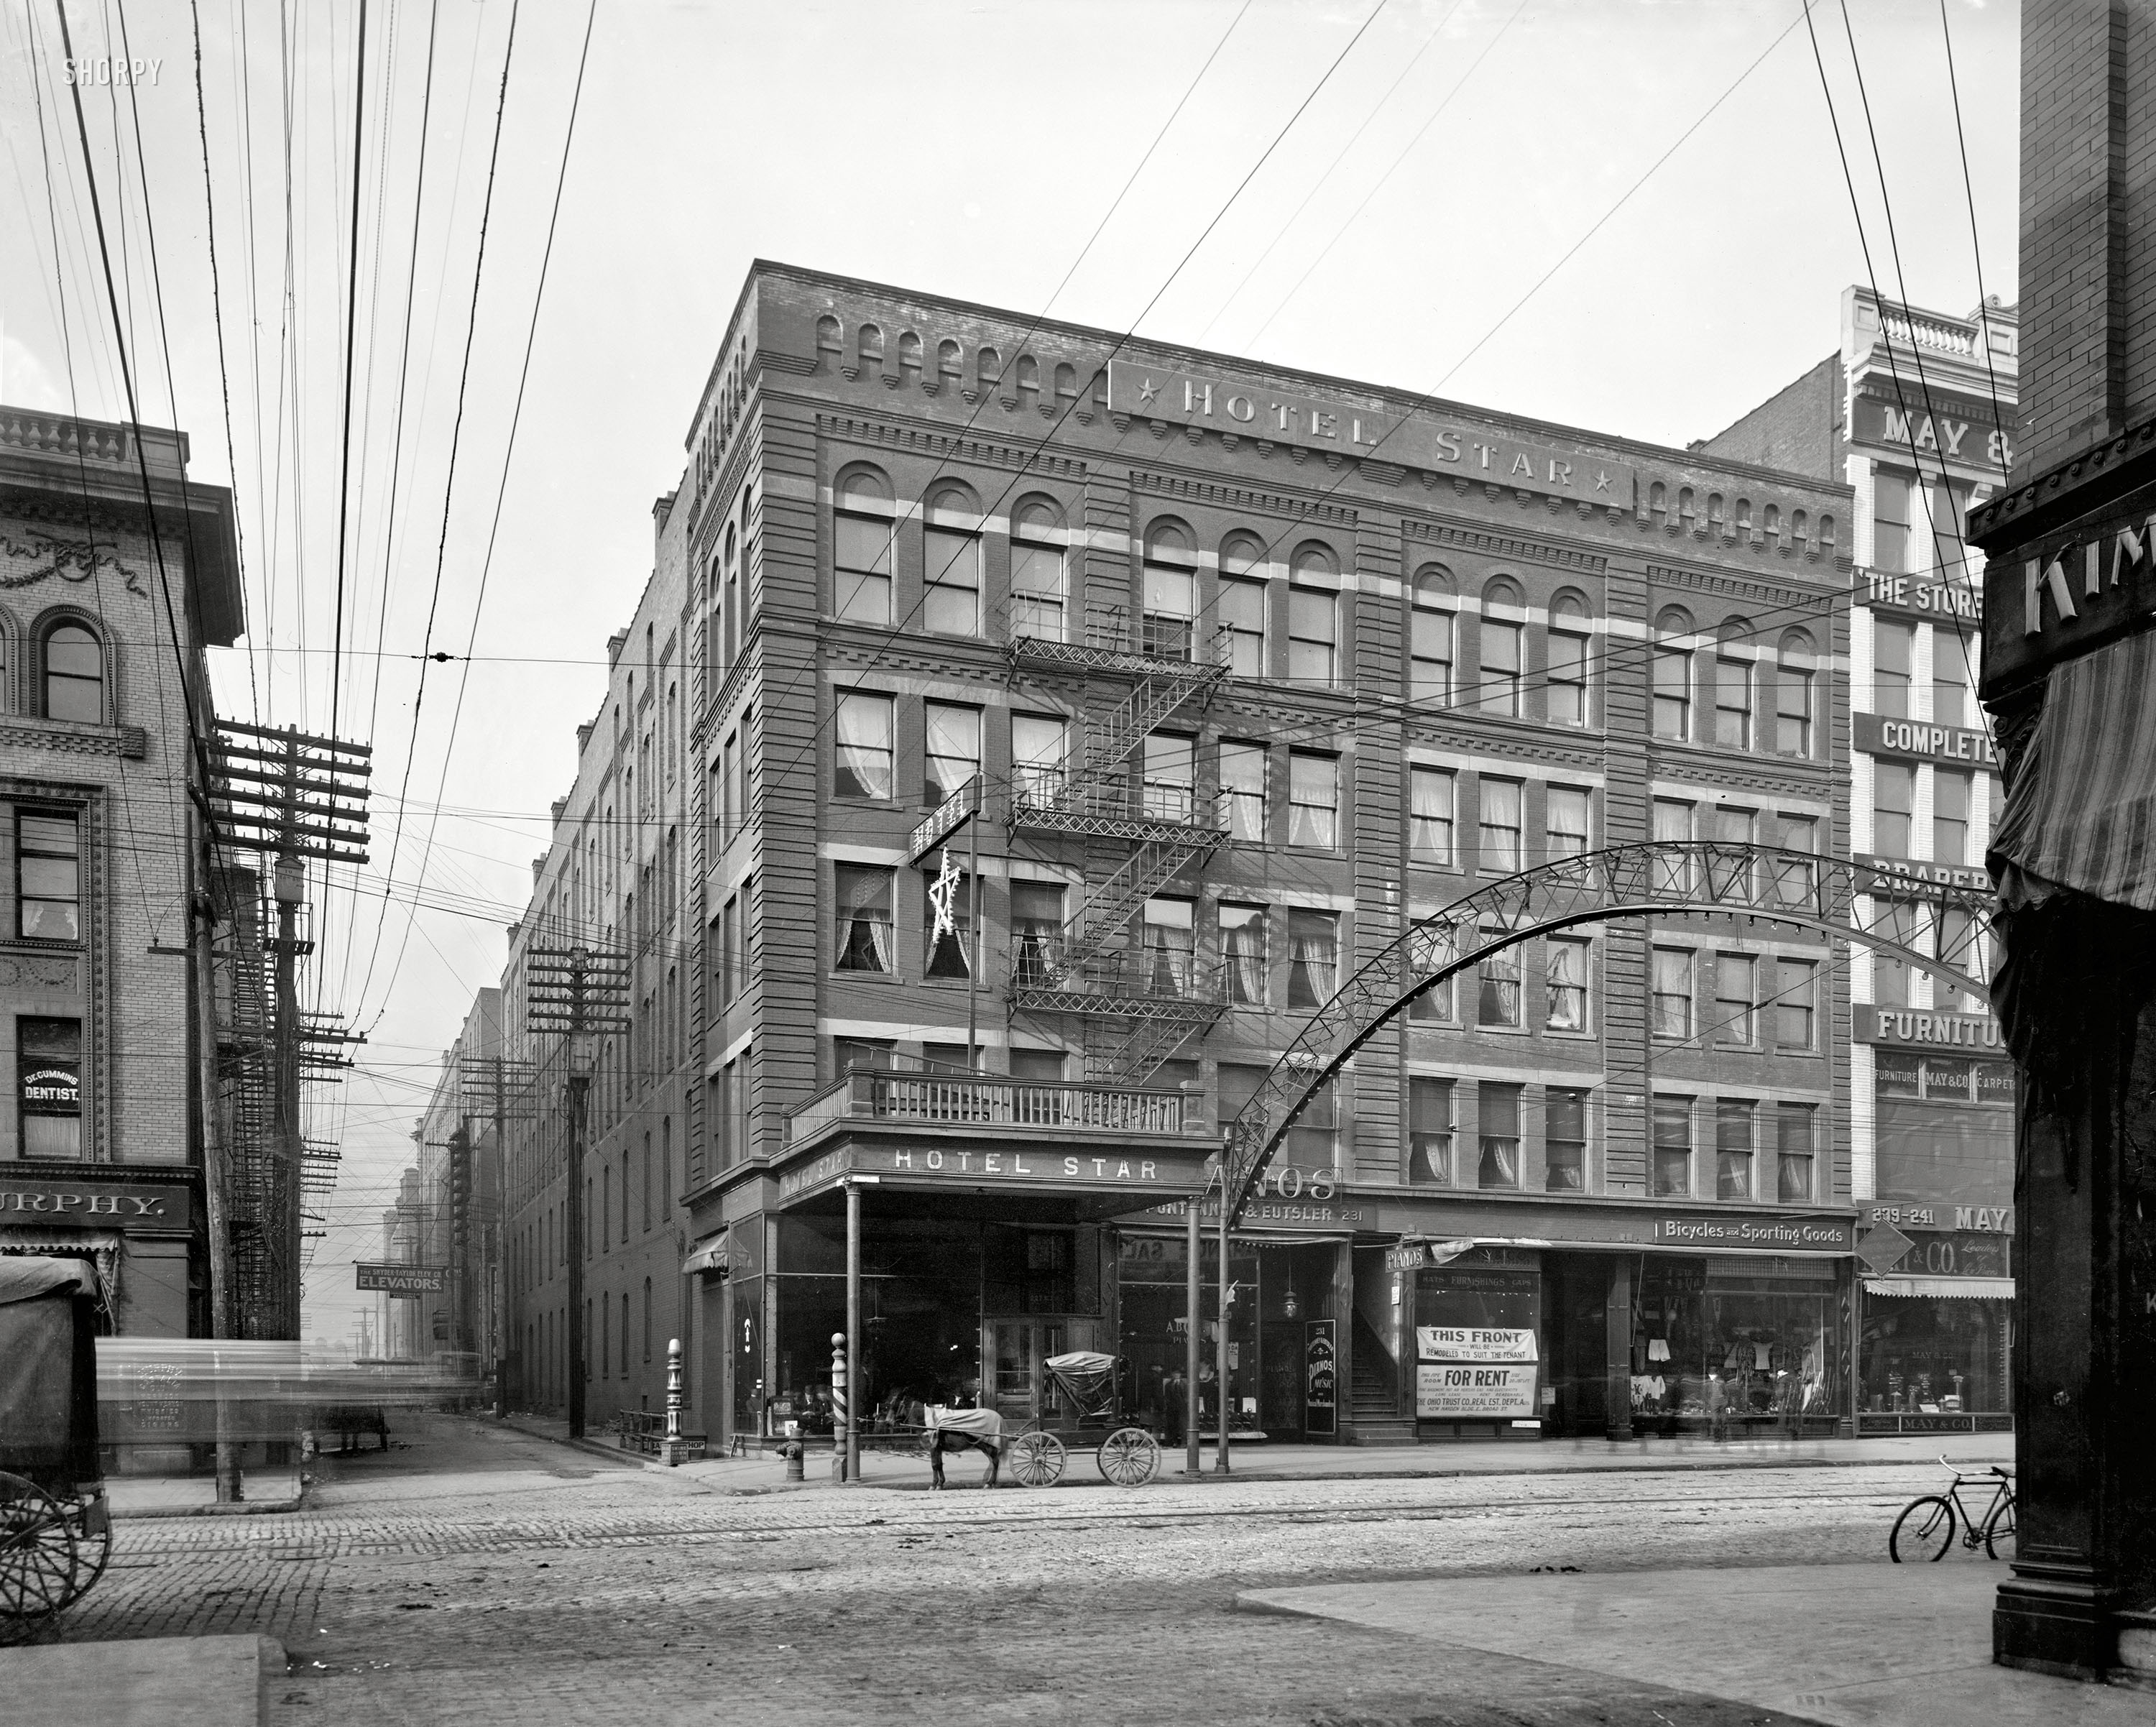 Columbus, Ohio, circa 1906. "Hotel Star." Free telegraph in every room! 8x10 inch dry plate glass negative, Detroit Publishing Company. View full size.